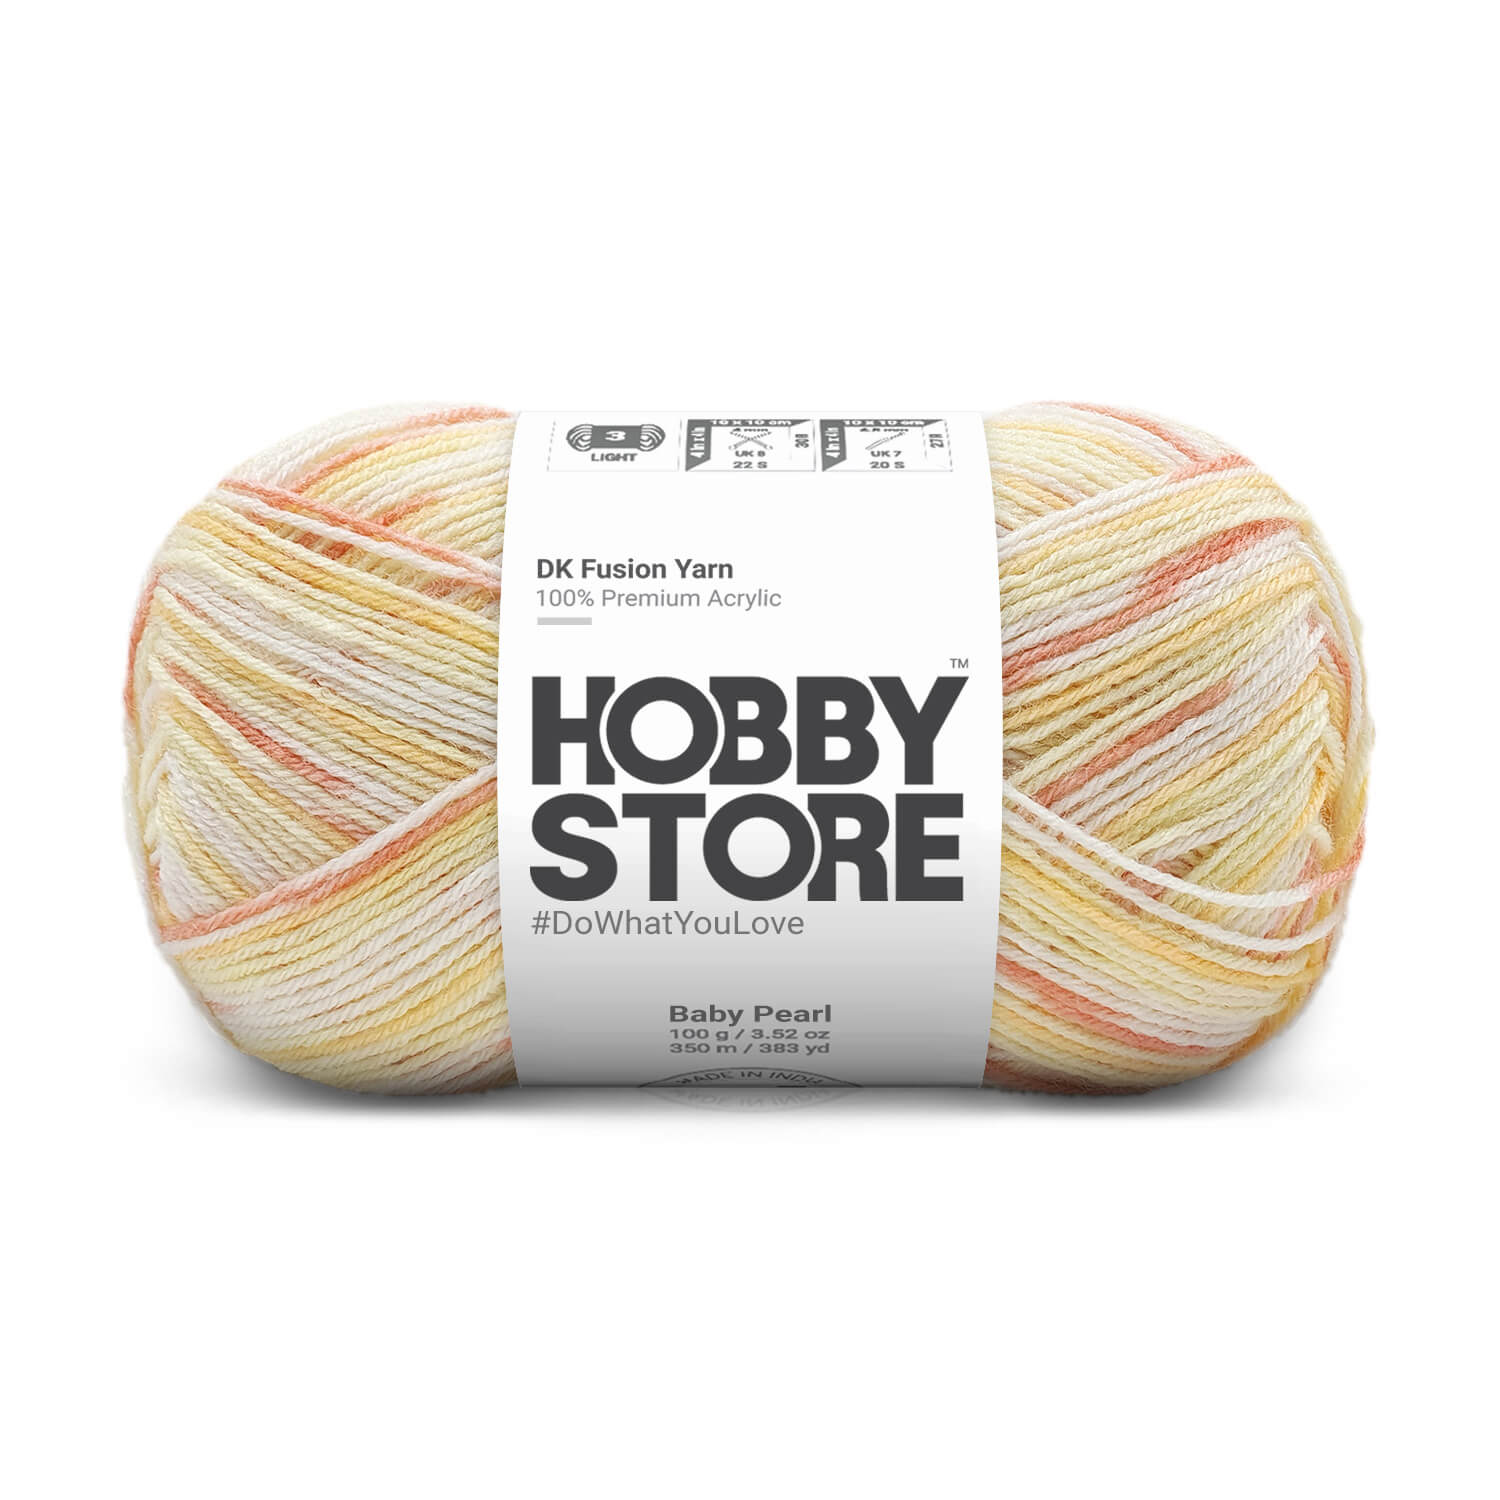 DK Fusion Yarn by Hobby Store - Baby Pearl 7103